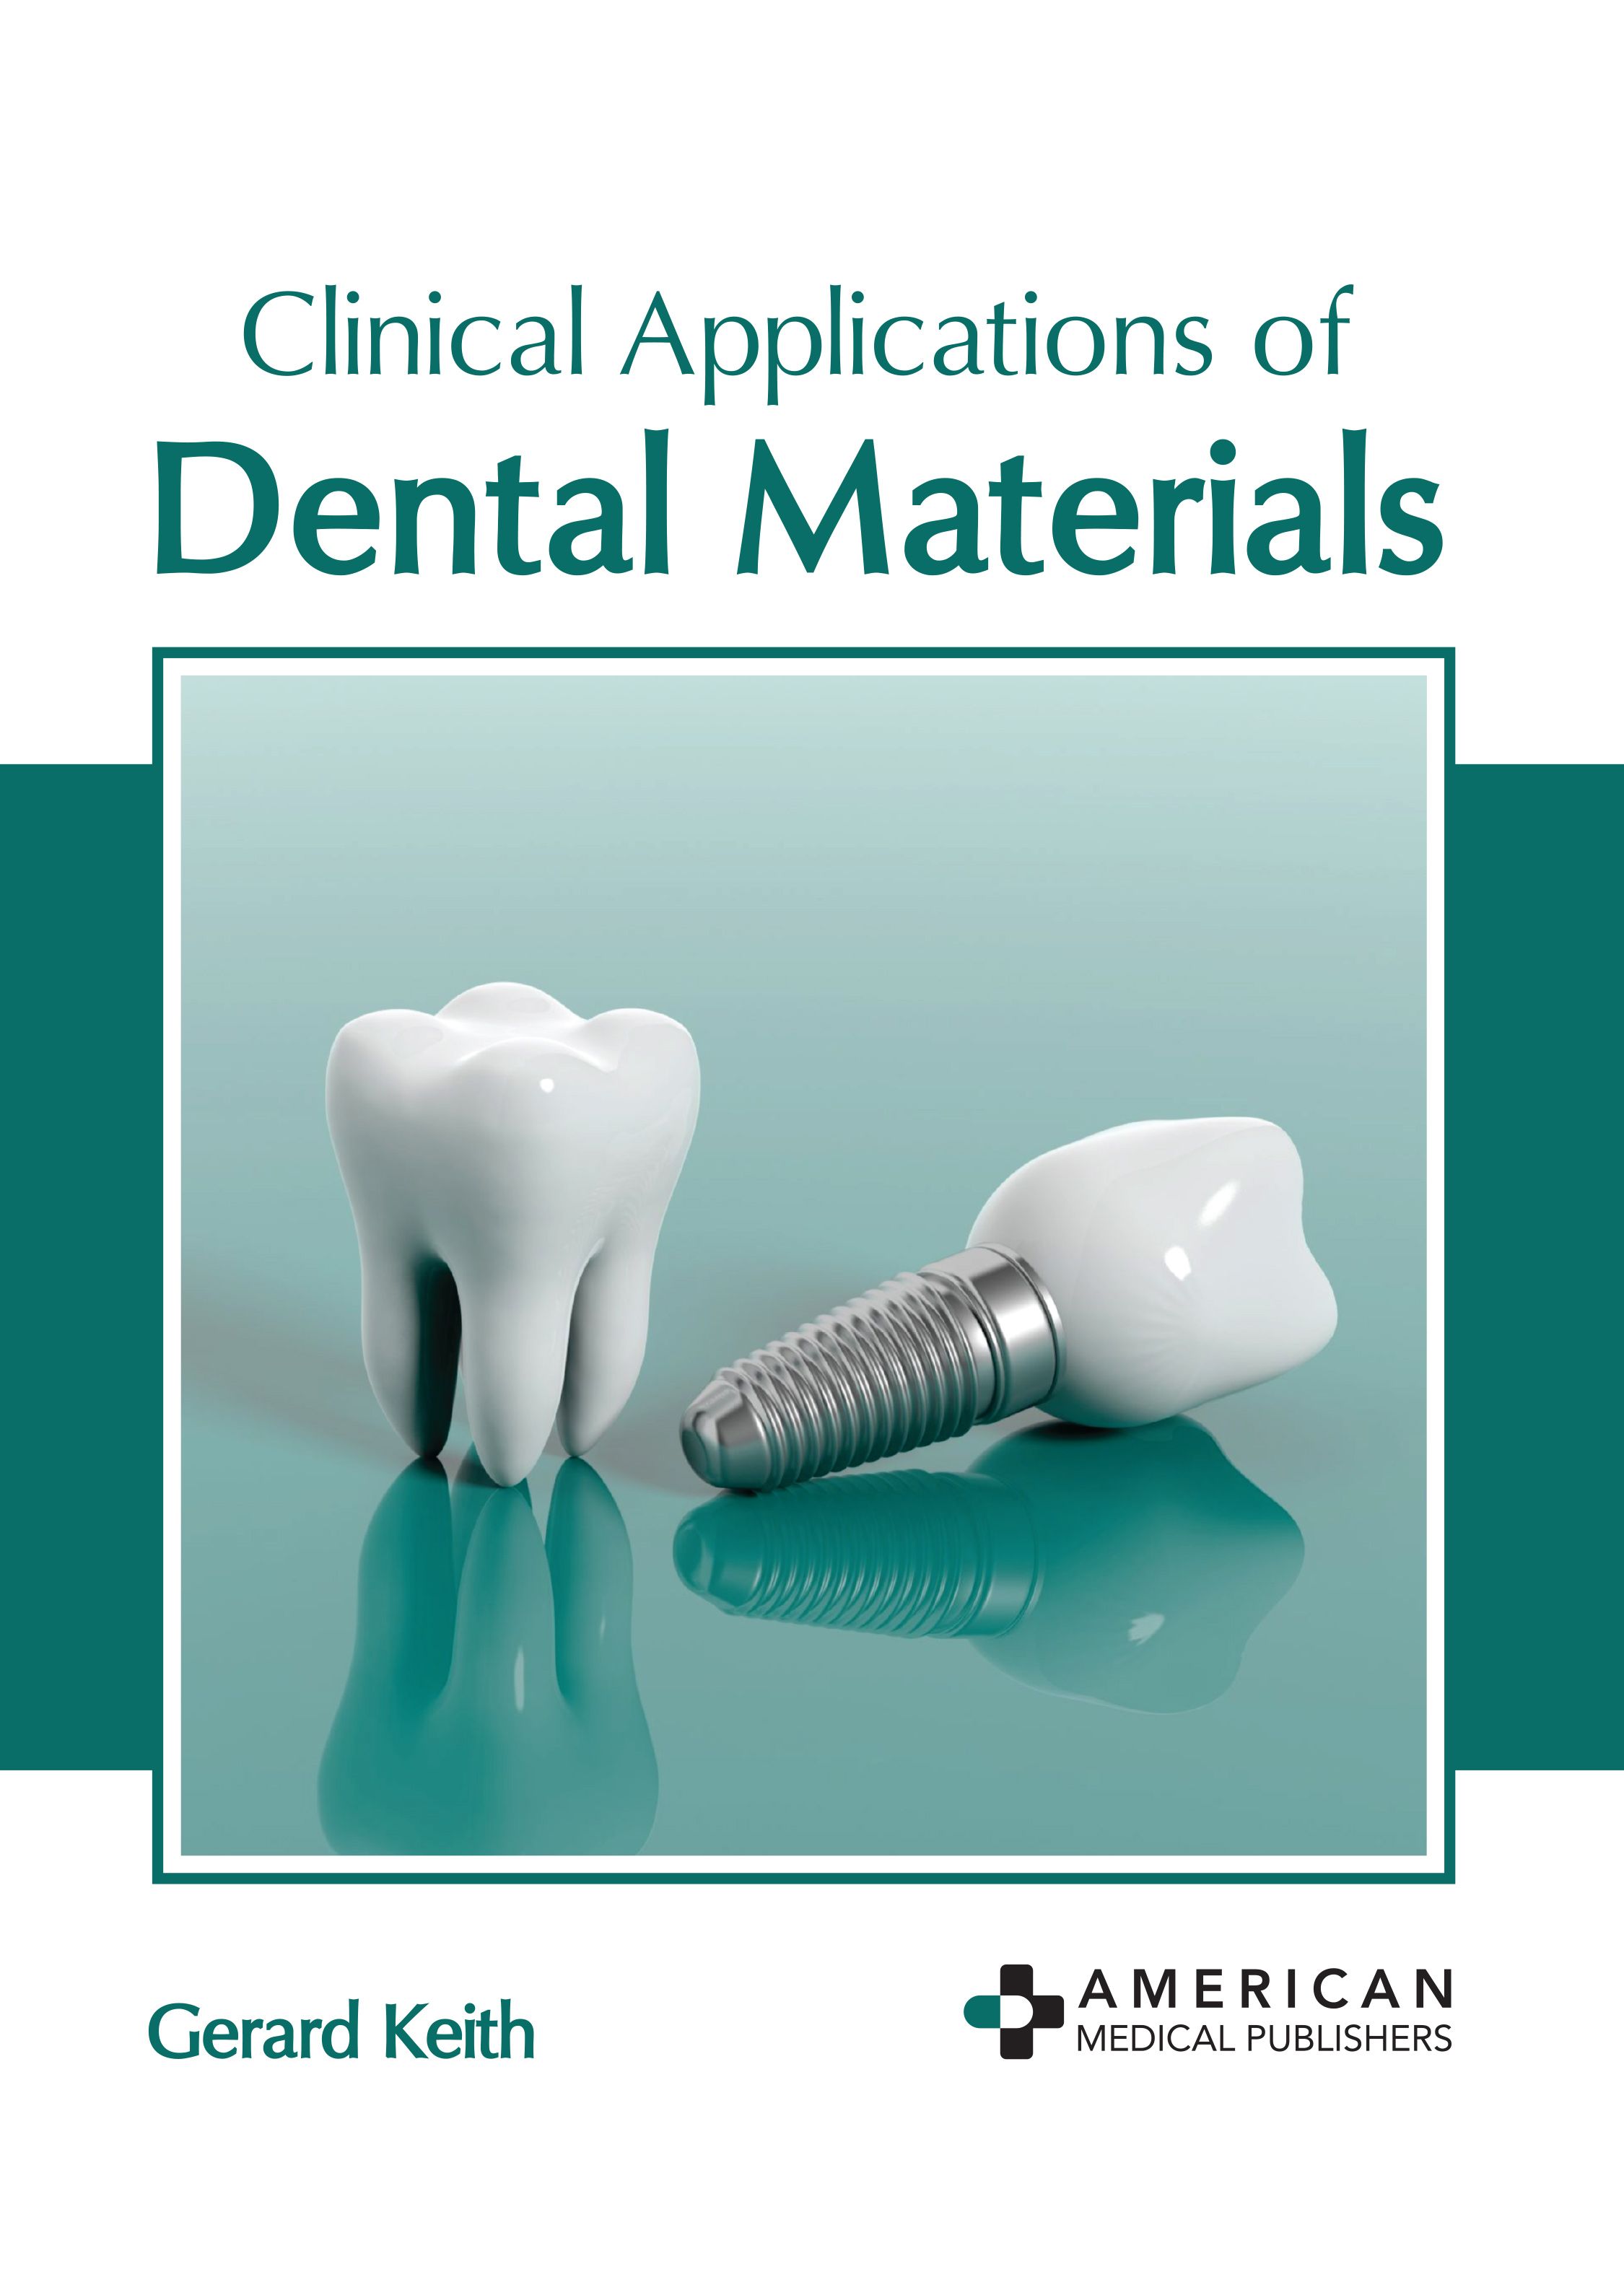 CLINICAL APPLICATIONS OF DENTAL MATERIALS